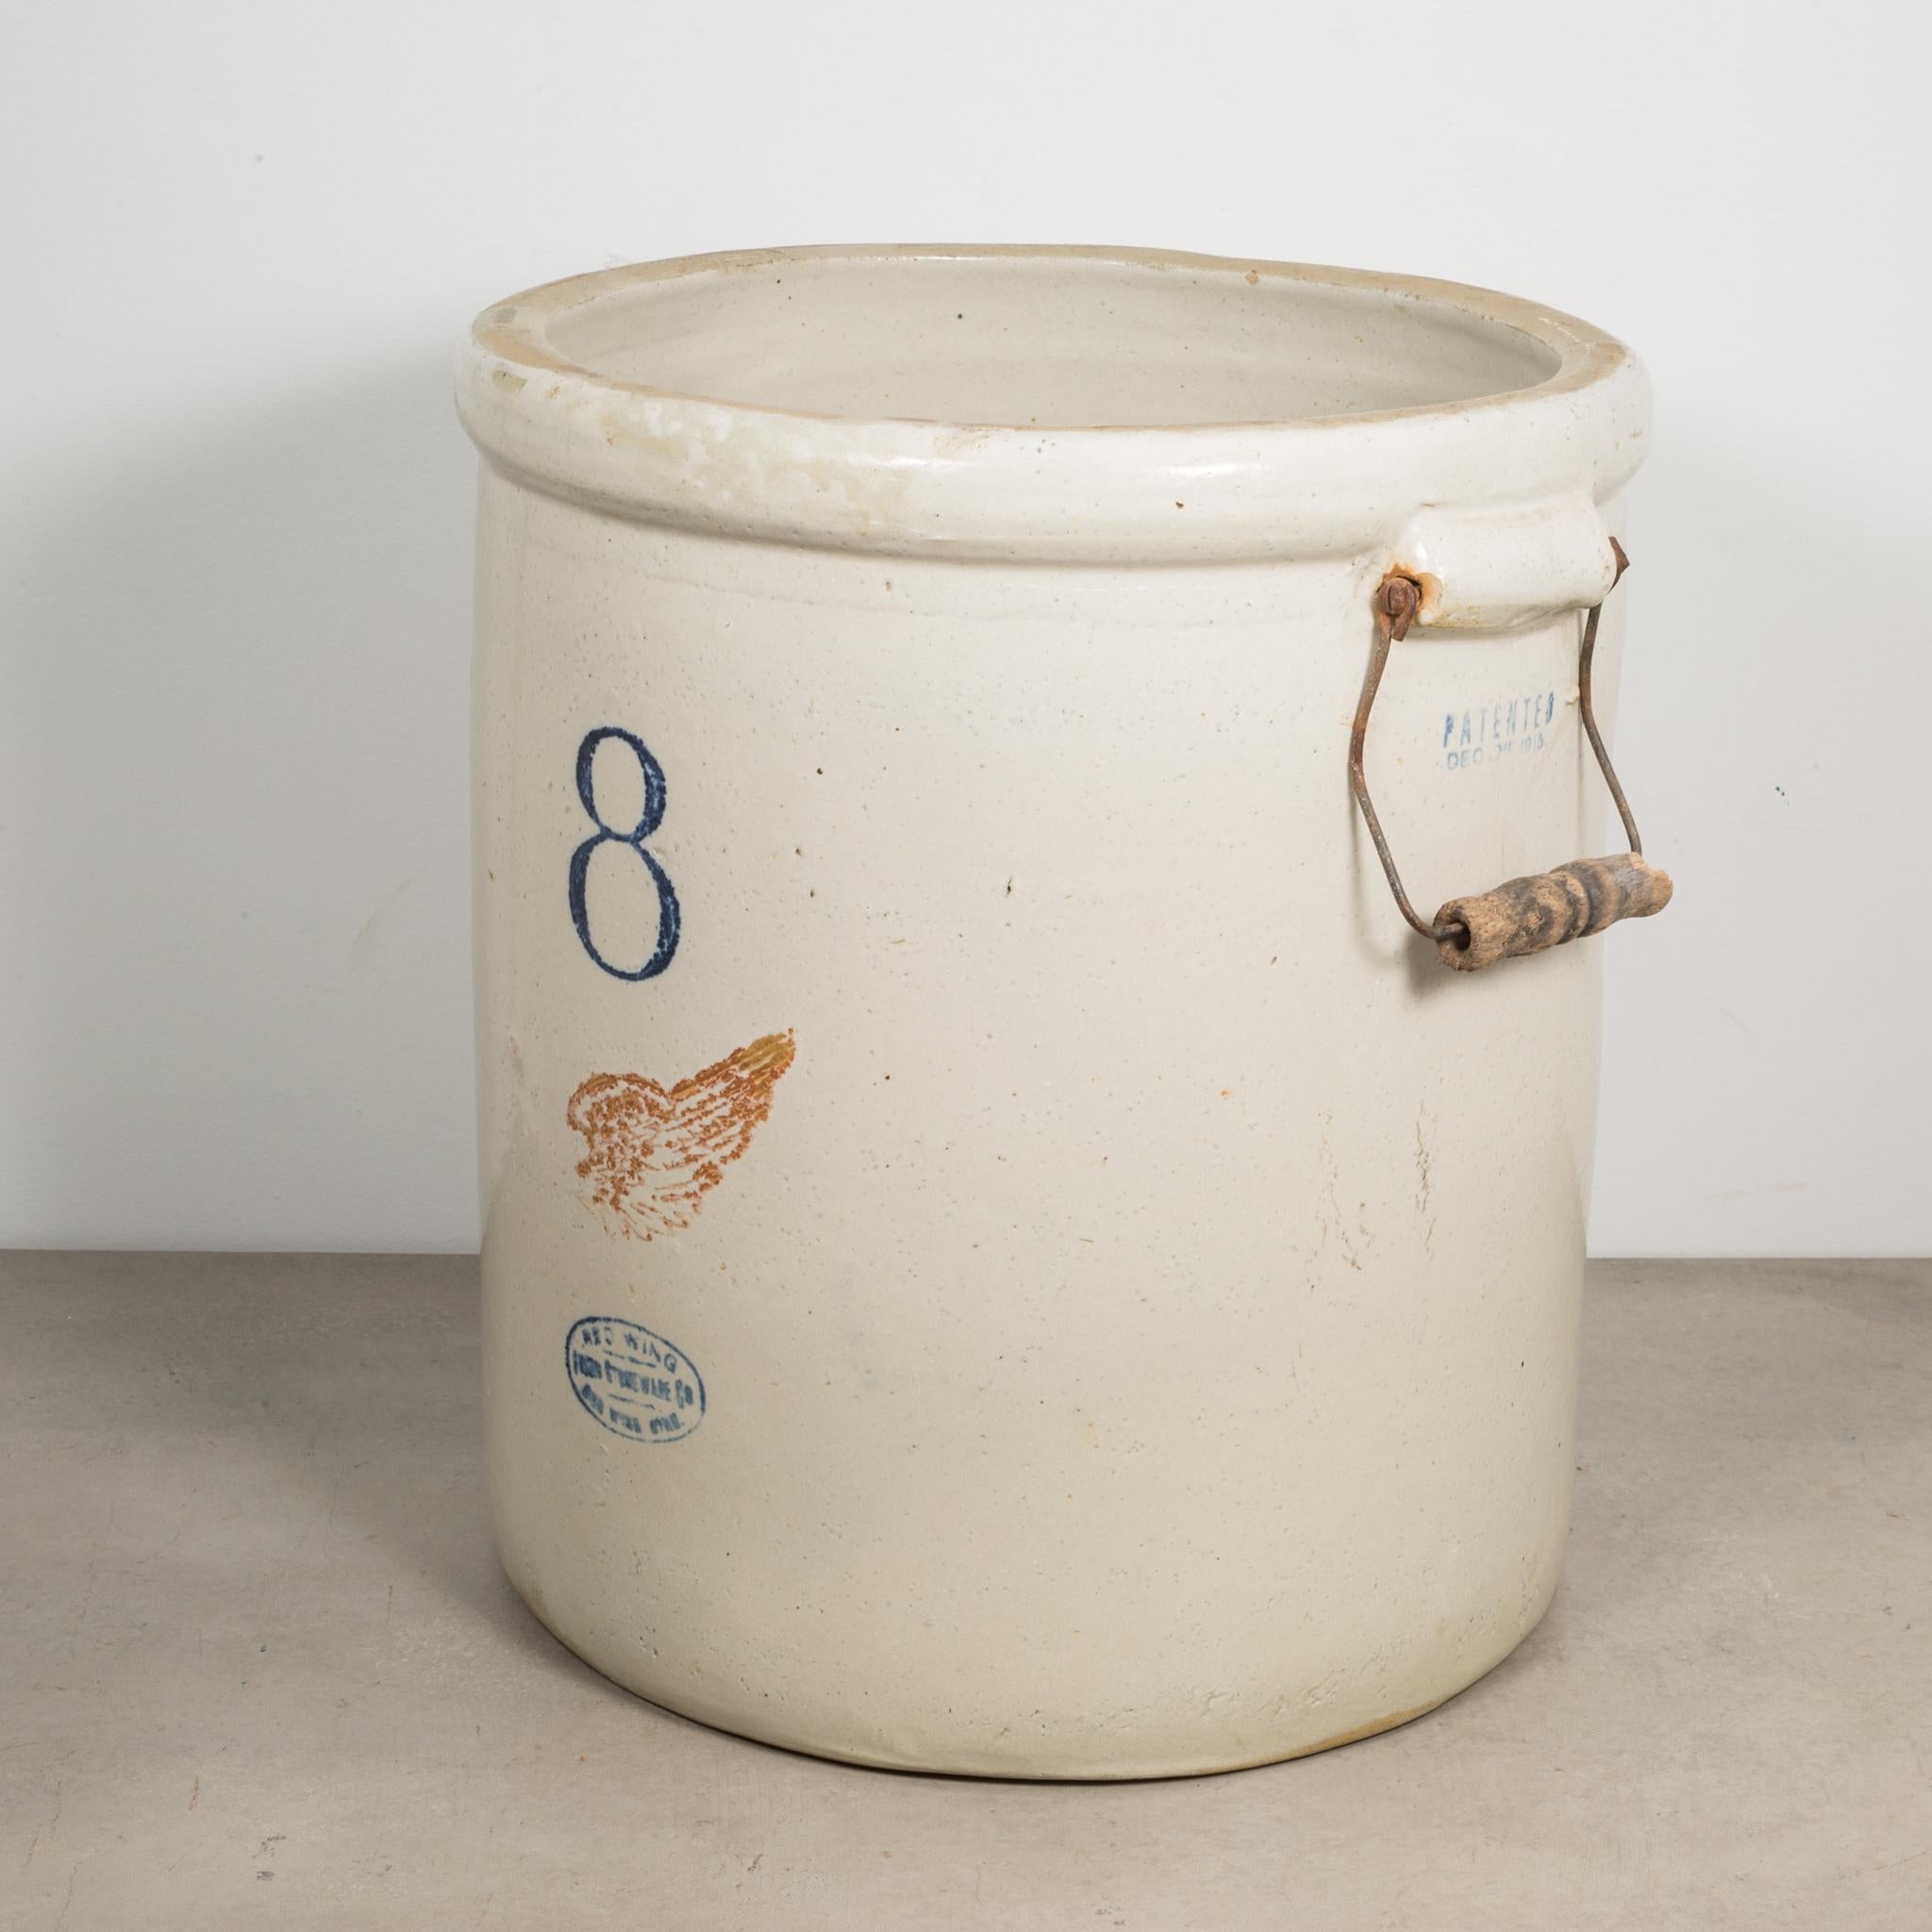 About

This is an original commercial 8 gallon crock with metal and wood handles manufactured by the Red Wing Union Stoneware Company, Minnesota USA. The piece has retained its original finish and is in excellent condition with appropriate patina